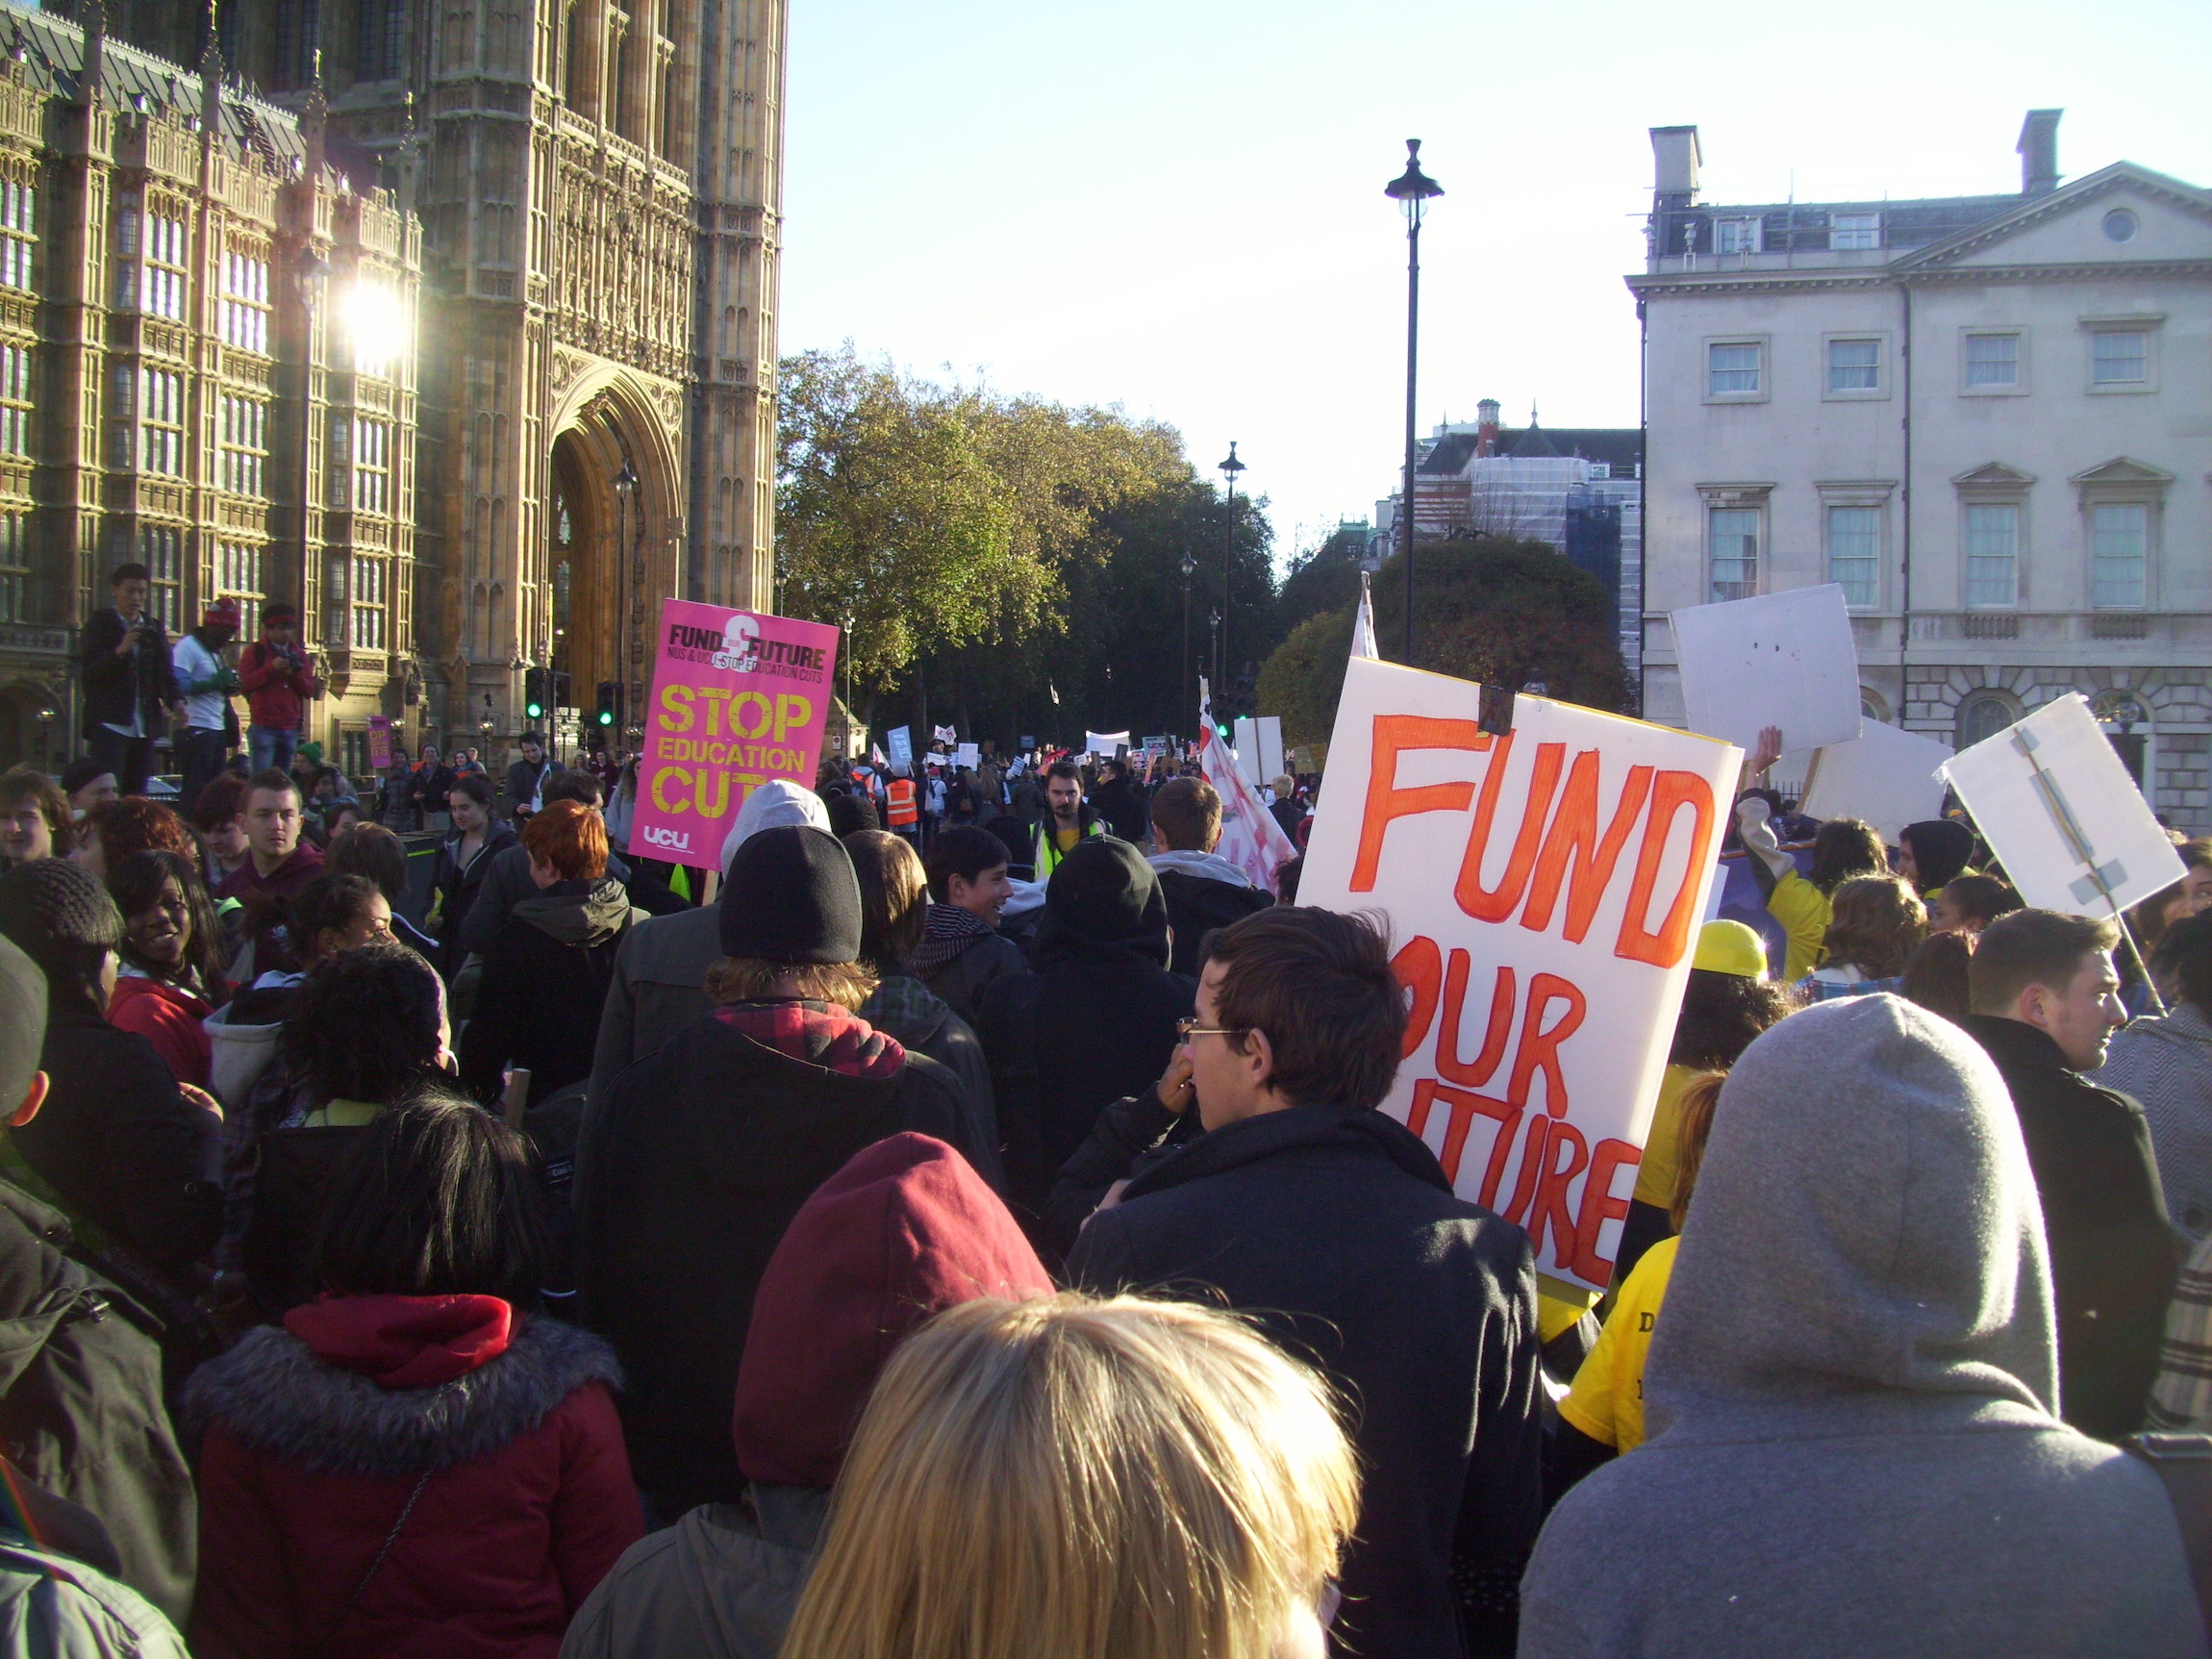 Students protesting in Westminster, 10 November 2010